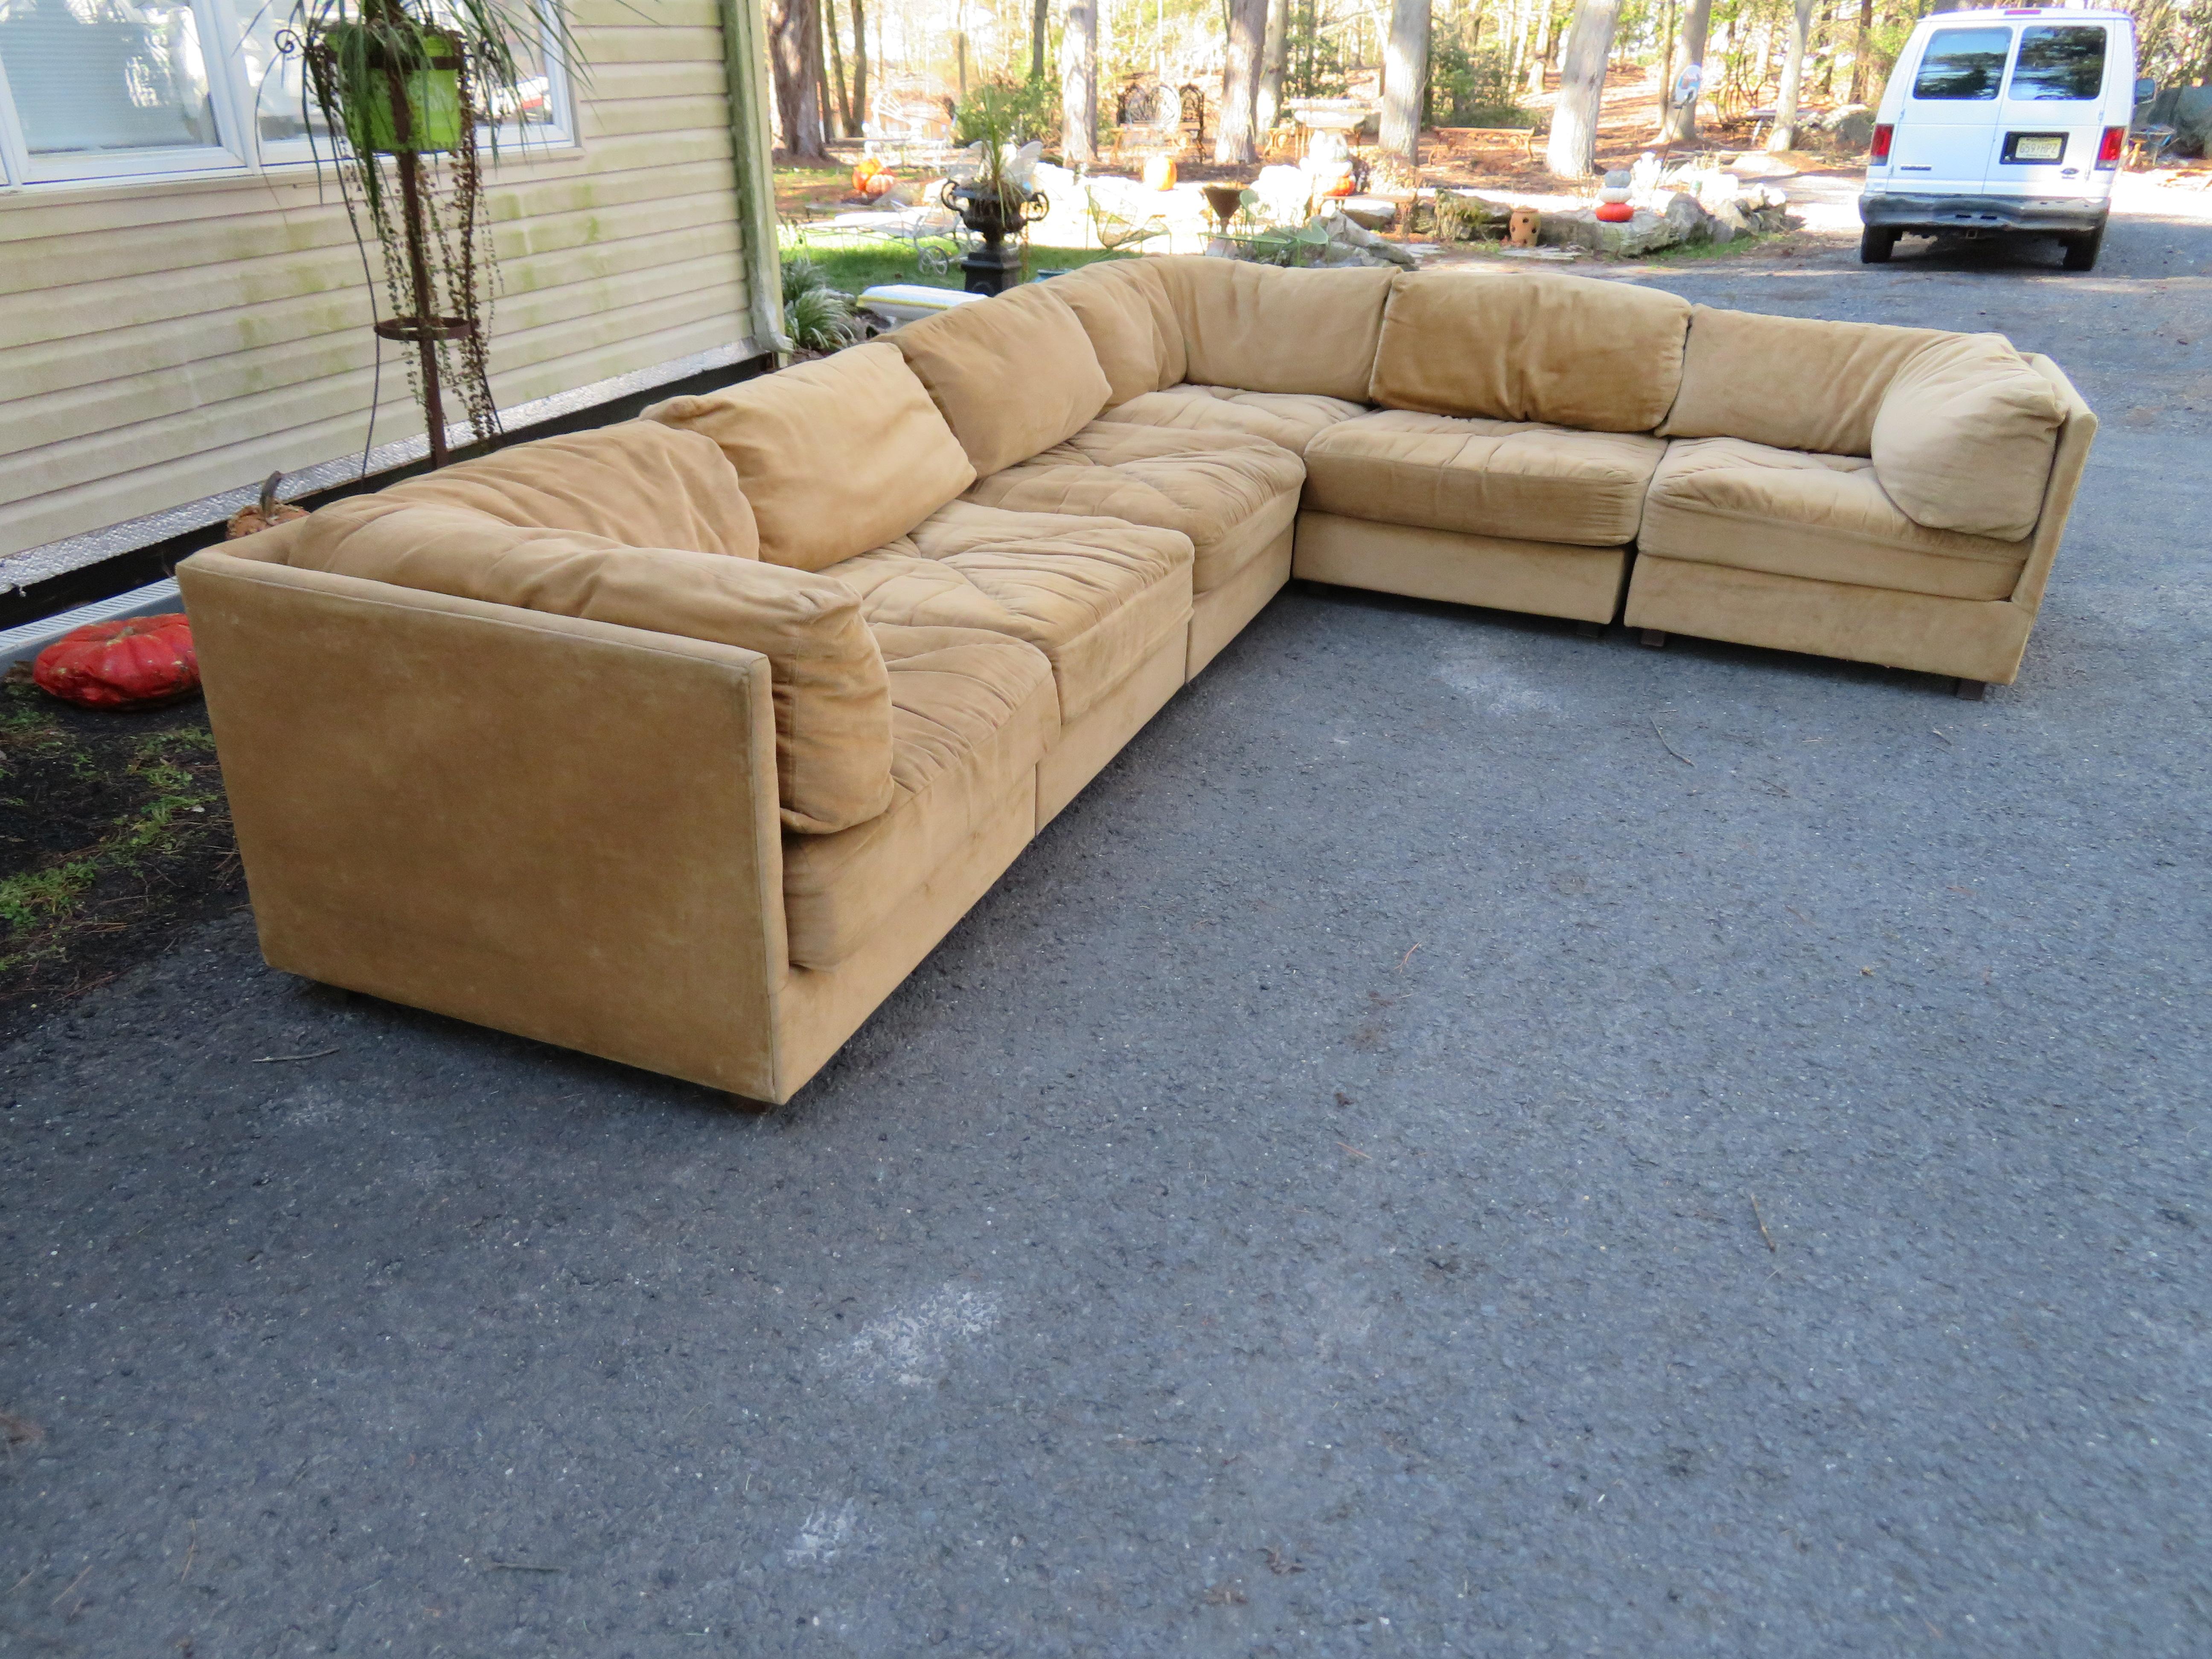 Handsome Milo Baughman style 6-piece sectional sofa by Selig. This sectional retains it's original tan velvet fabric in usable clean condition but as with all vintage sofas we do recommend re-upholstery. We love these vintage modular cube sofas for